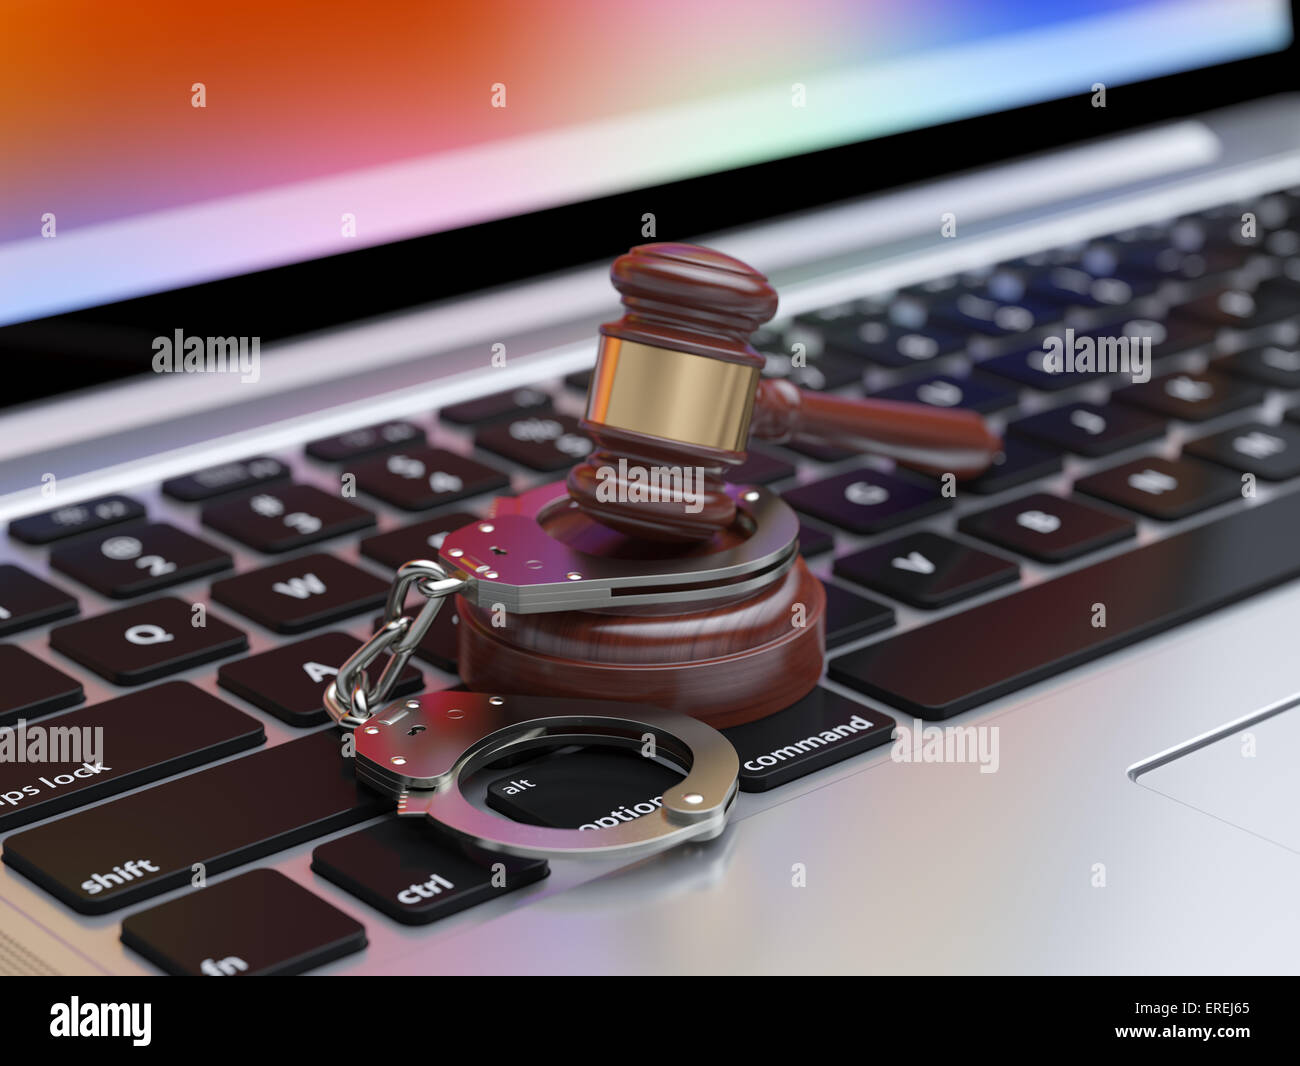 3d render of handcuffs and judge gavel on the laptop keyboard with soft focus Stock Photo